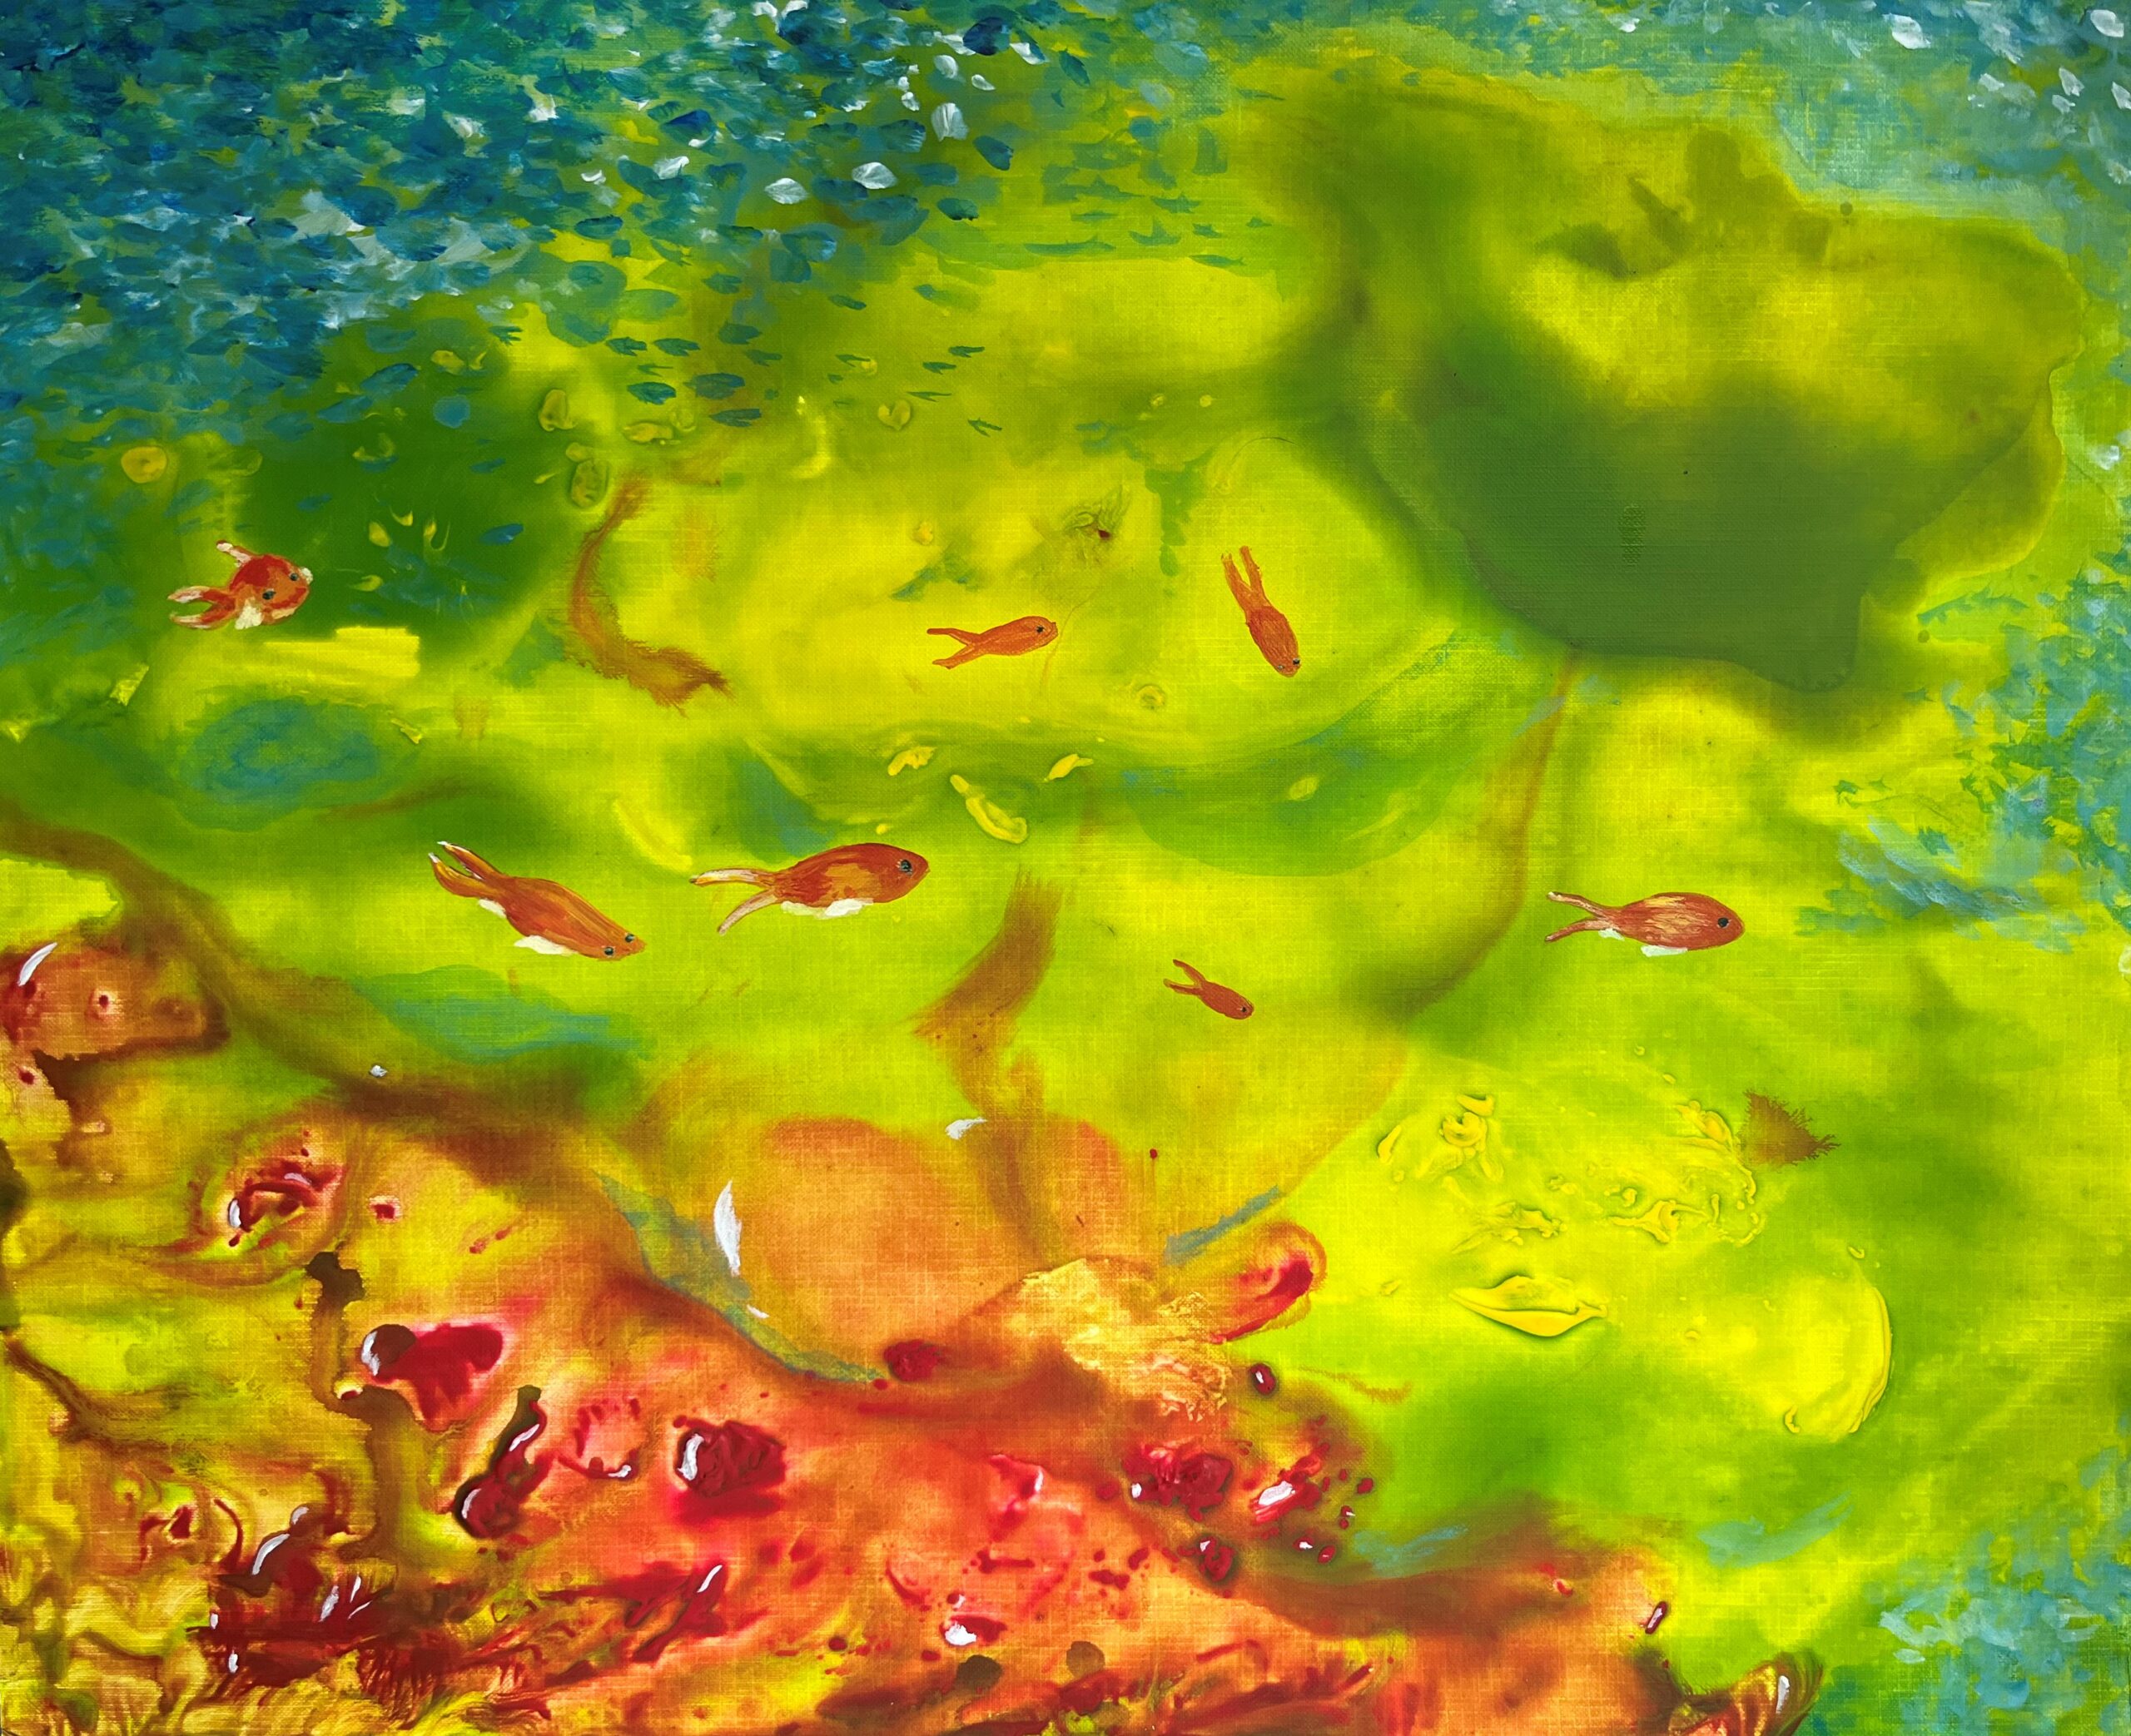 An impressionistic painting of small orange fish swimming around in a colorful seascape painted in blues, greens and orange coloring.